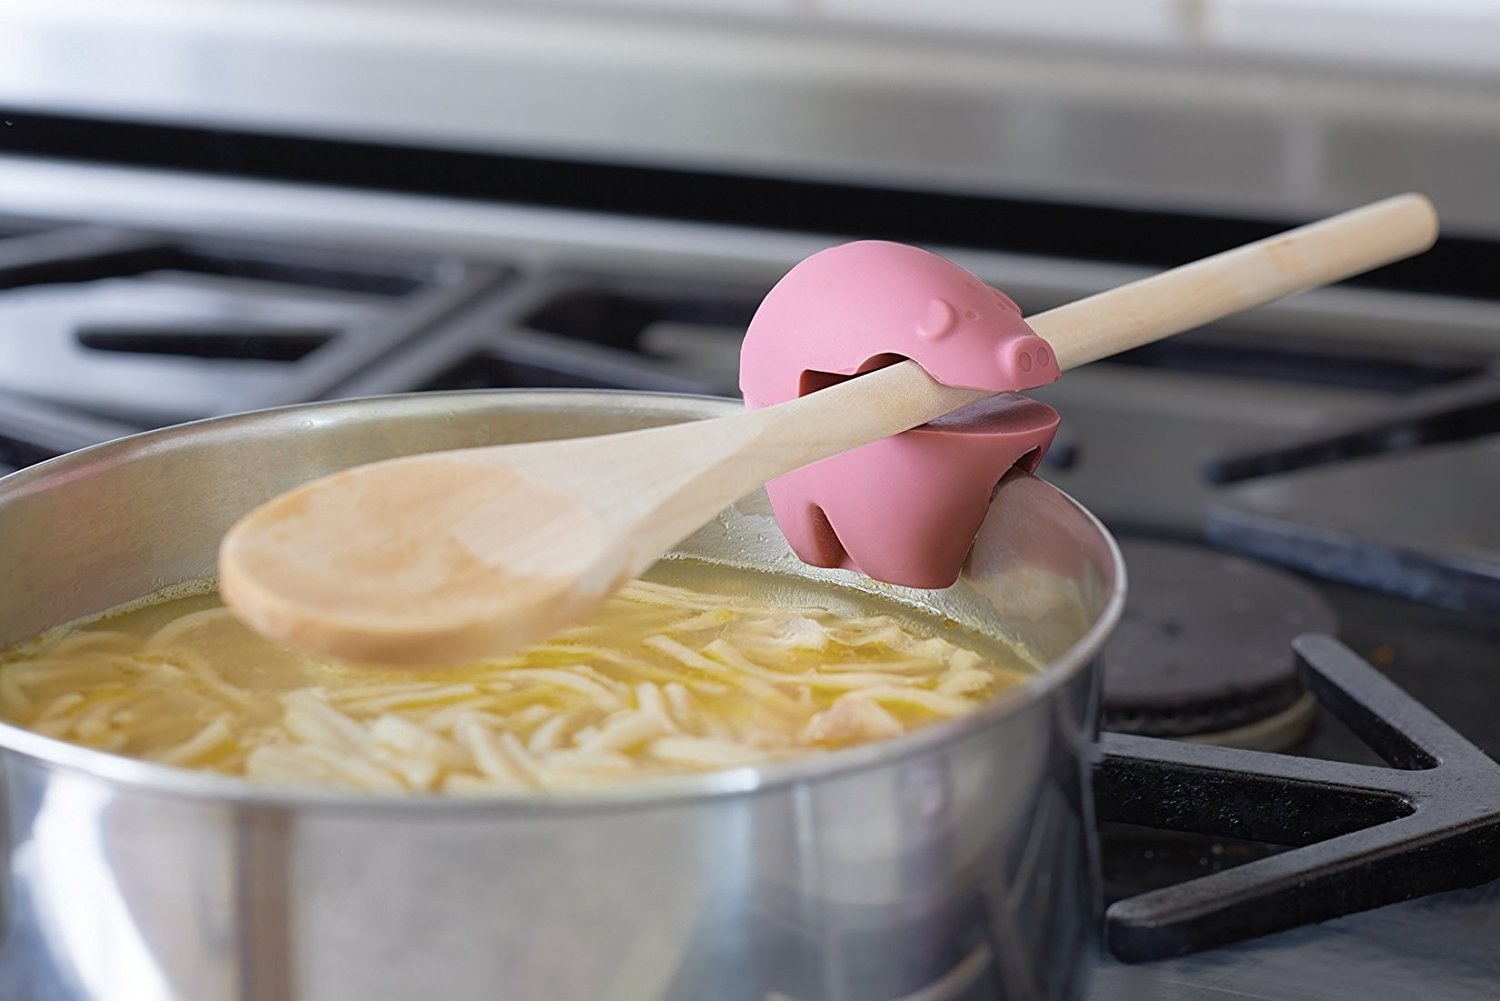 Weird And Convenient: 15 Animal-Shaped Kitchen Gadgets You'll